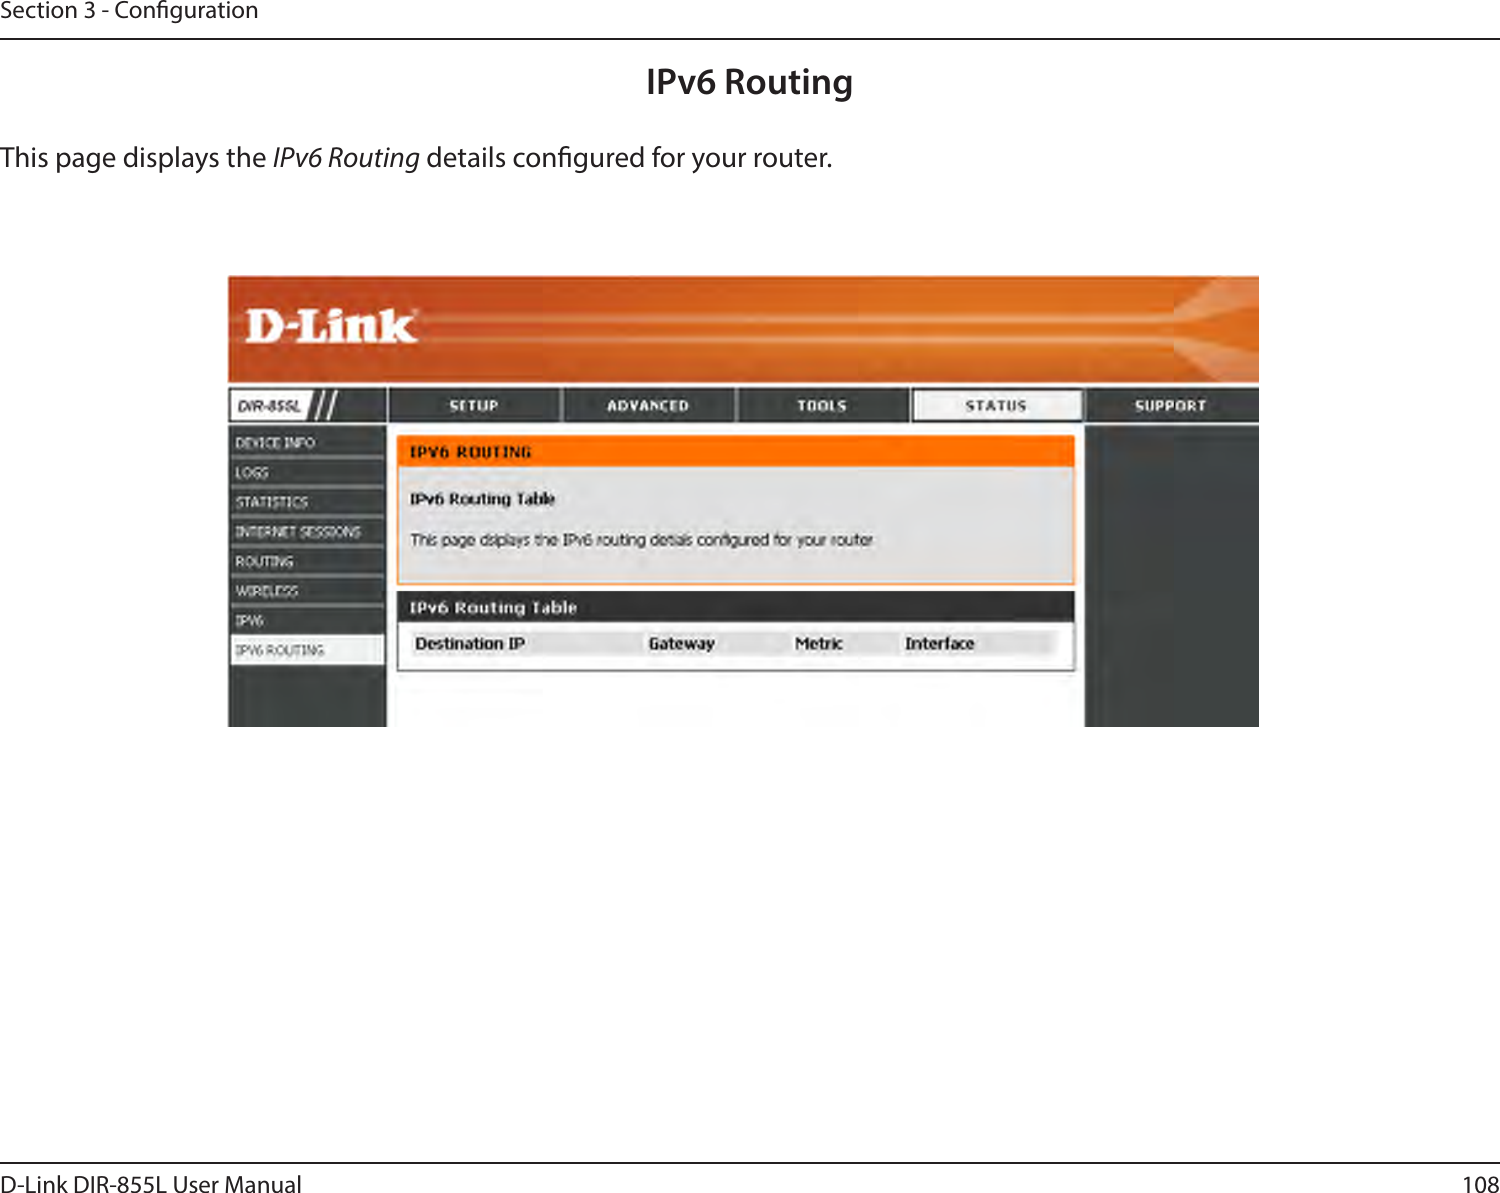 108D-Link DIR-855L User ManualSection 3 - CongurationIPv6 RoutingThis page displays the IPv6 Routing details congured for your router. 